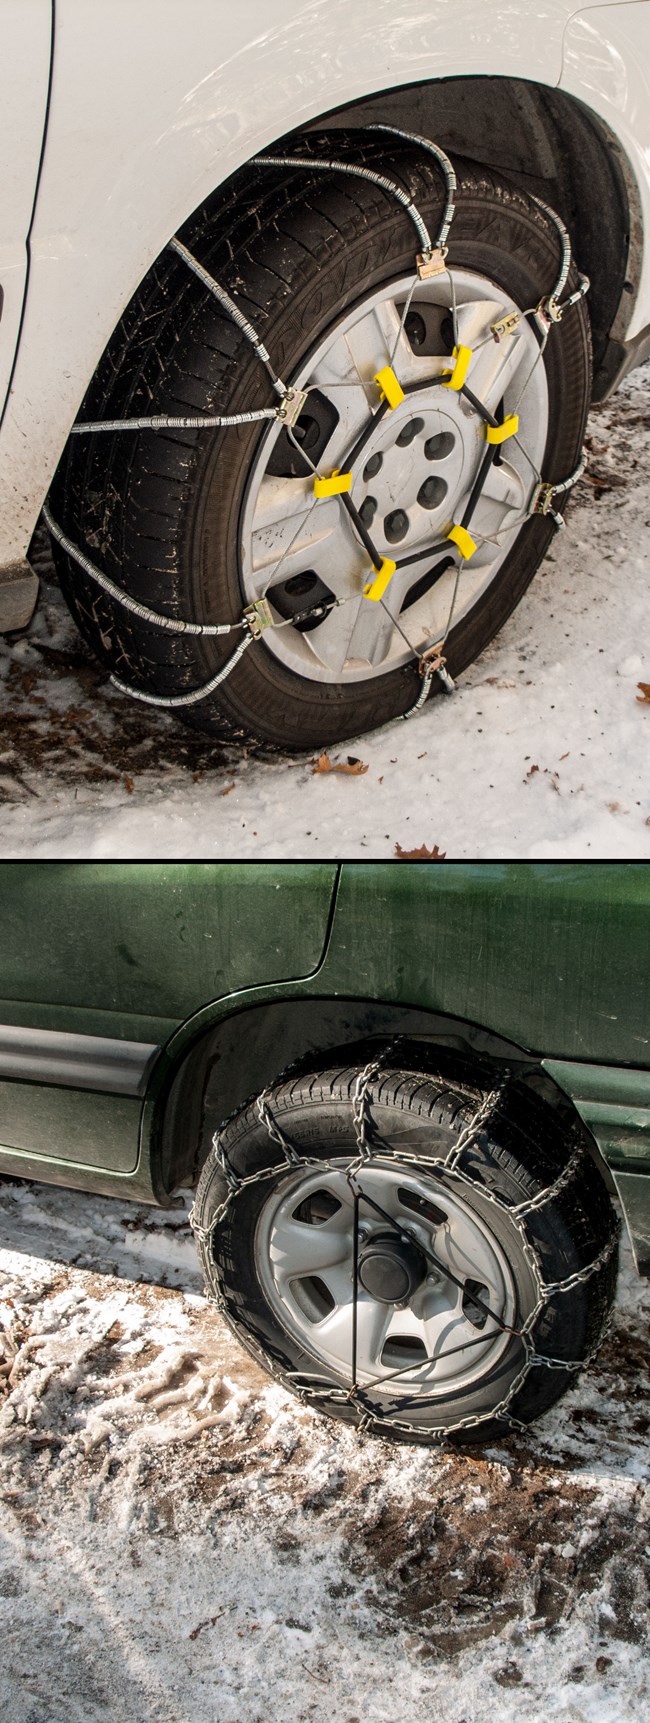 Tire Chain Requirements - Yosemite National Park (U.S. National